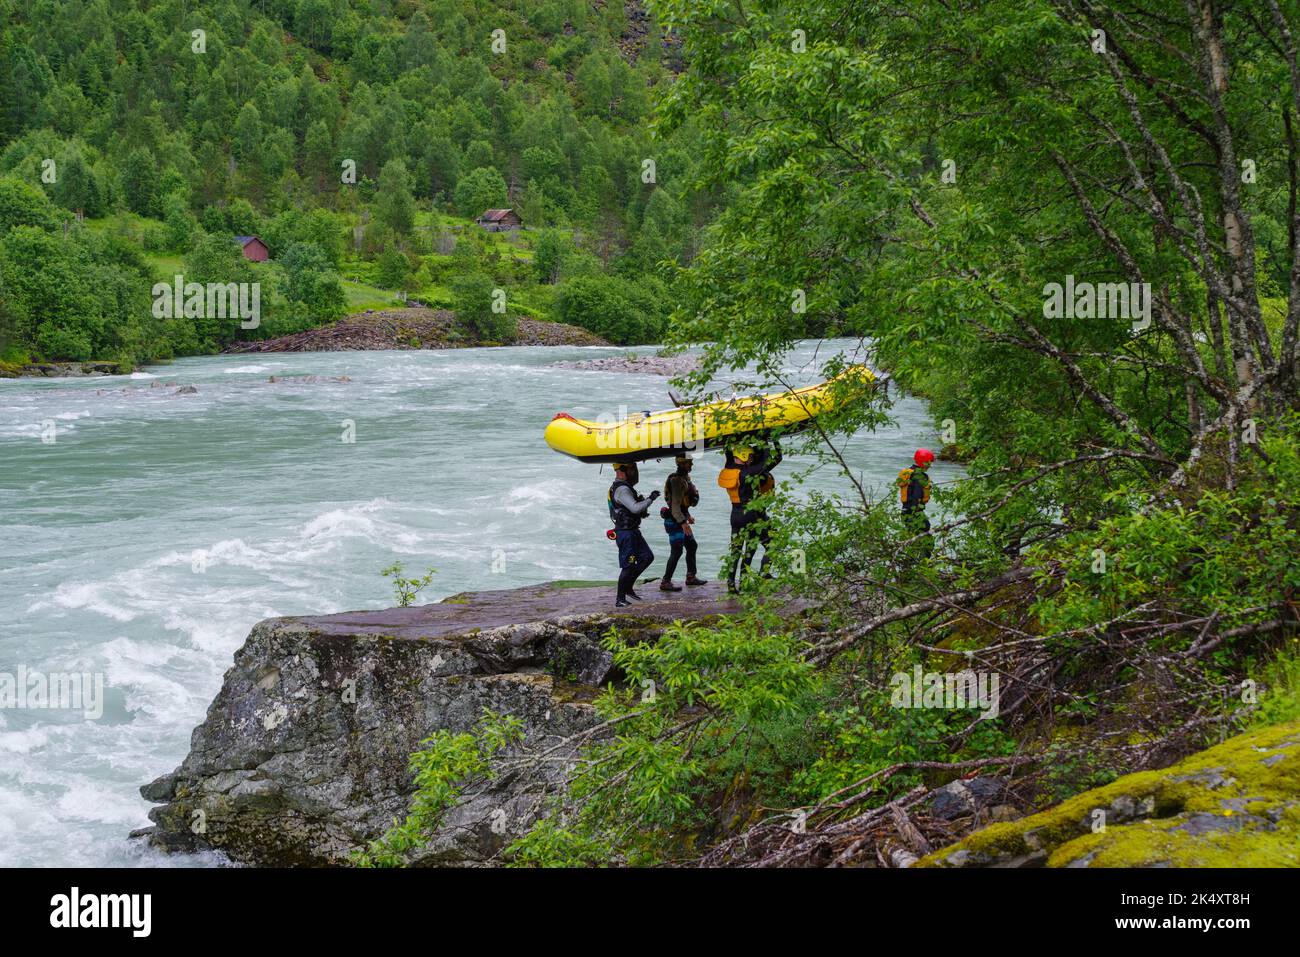 KROSSBU, NORWAY - JULY 3, 2022: Rafting team carrying their boat along a wild melt water river Stock Photo